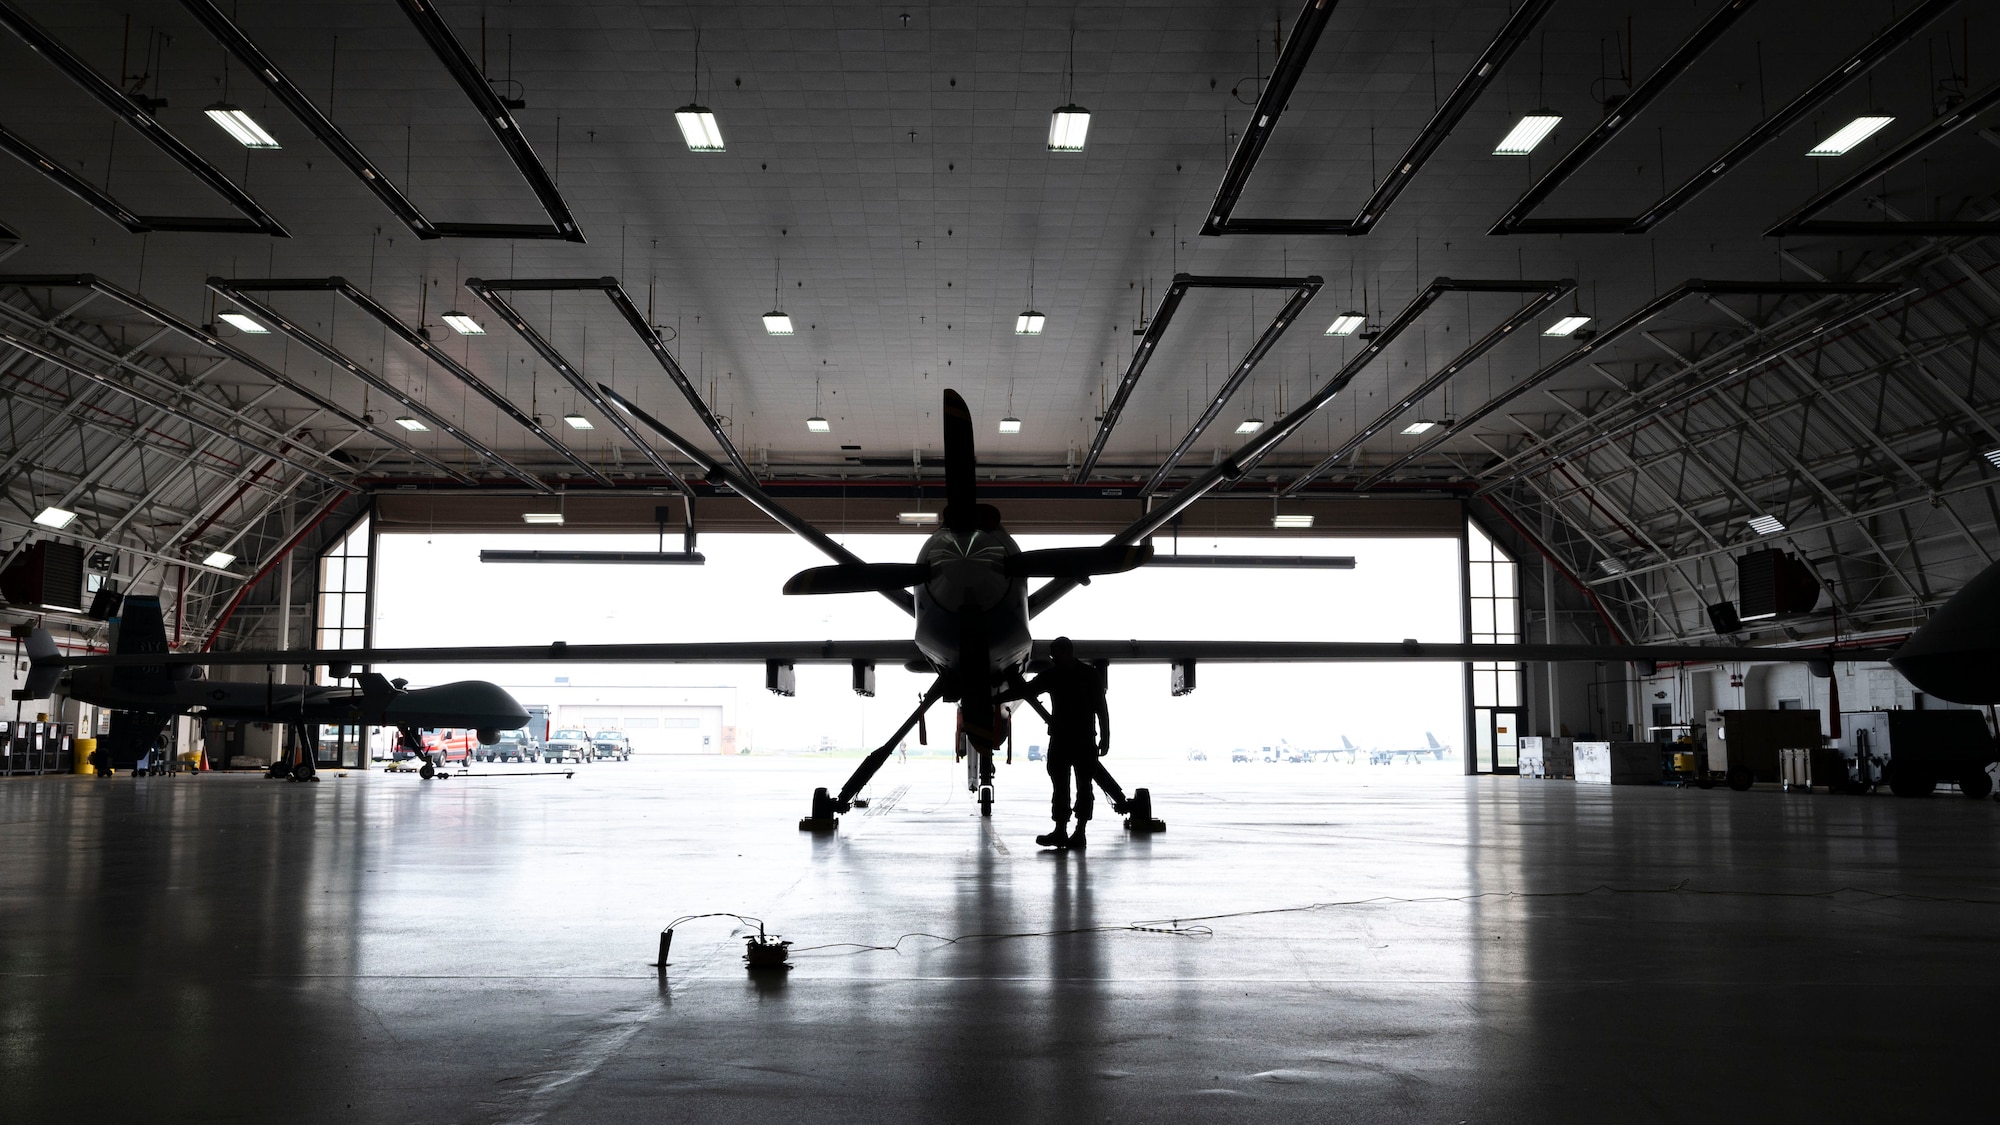 U.S. Air Force Airman 1st Class Koby Davis, 174th Attack Wing crew chief, inspects an MQ-9 Reaper at Hancock Field Air National Guard Base, New York, June 29, 2023. The 491st ATKS is responsible for assisting the Air National Guard at Hancock in producing approximately 66 aircrew per year, ensuring combat-ready Airmen are capable of piloting MQ-9s. (U.S. Air Force photo by Airman 1st Class Isaiah Pedrazzini